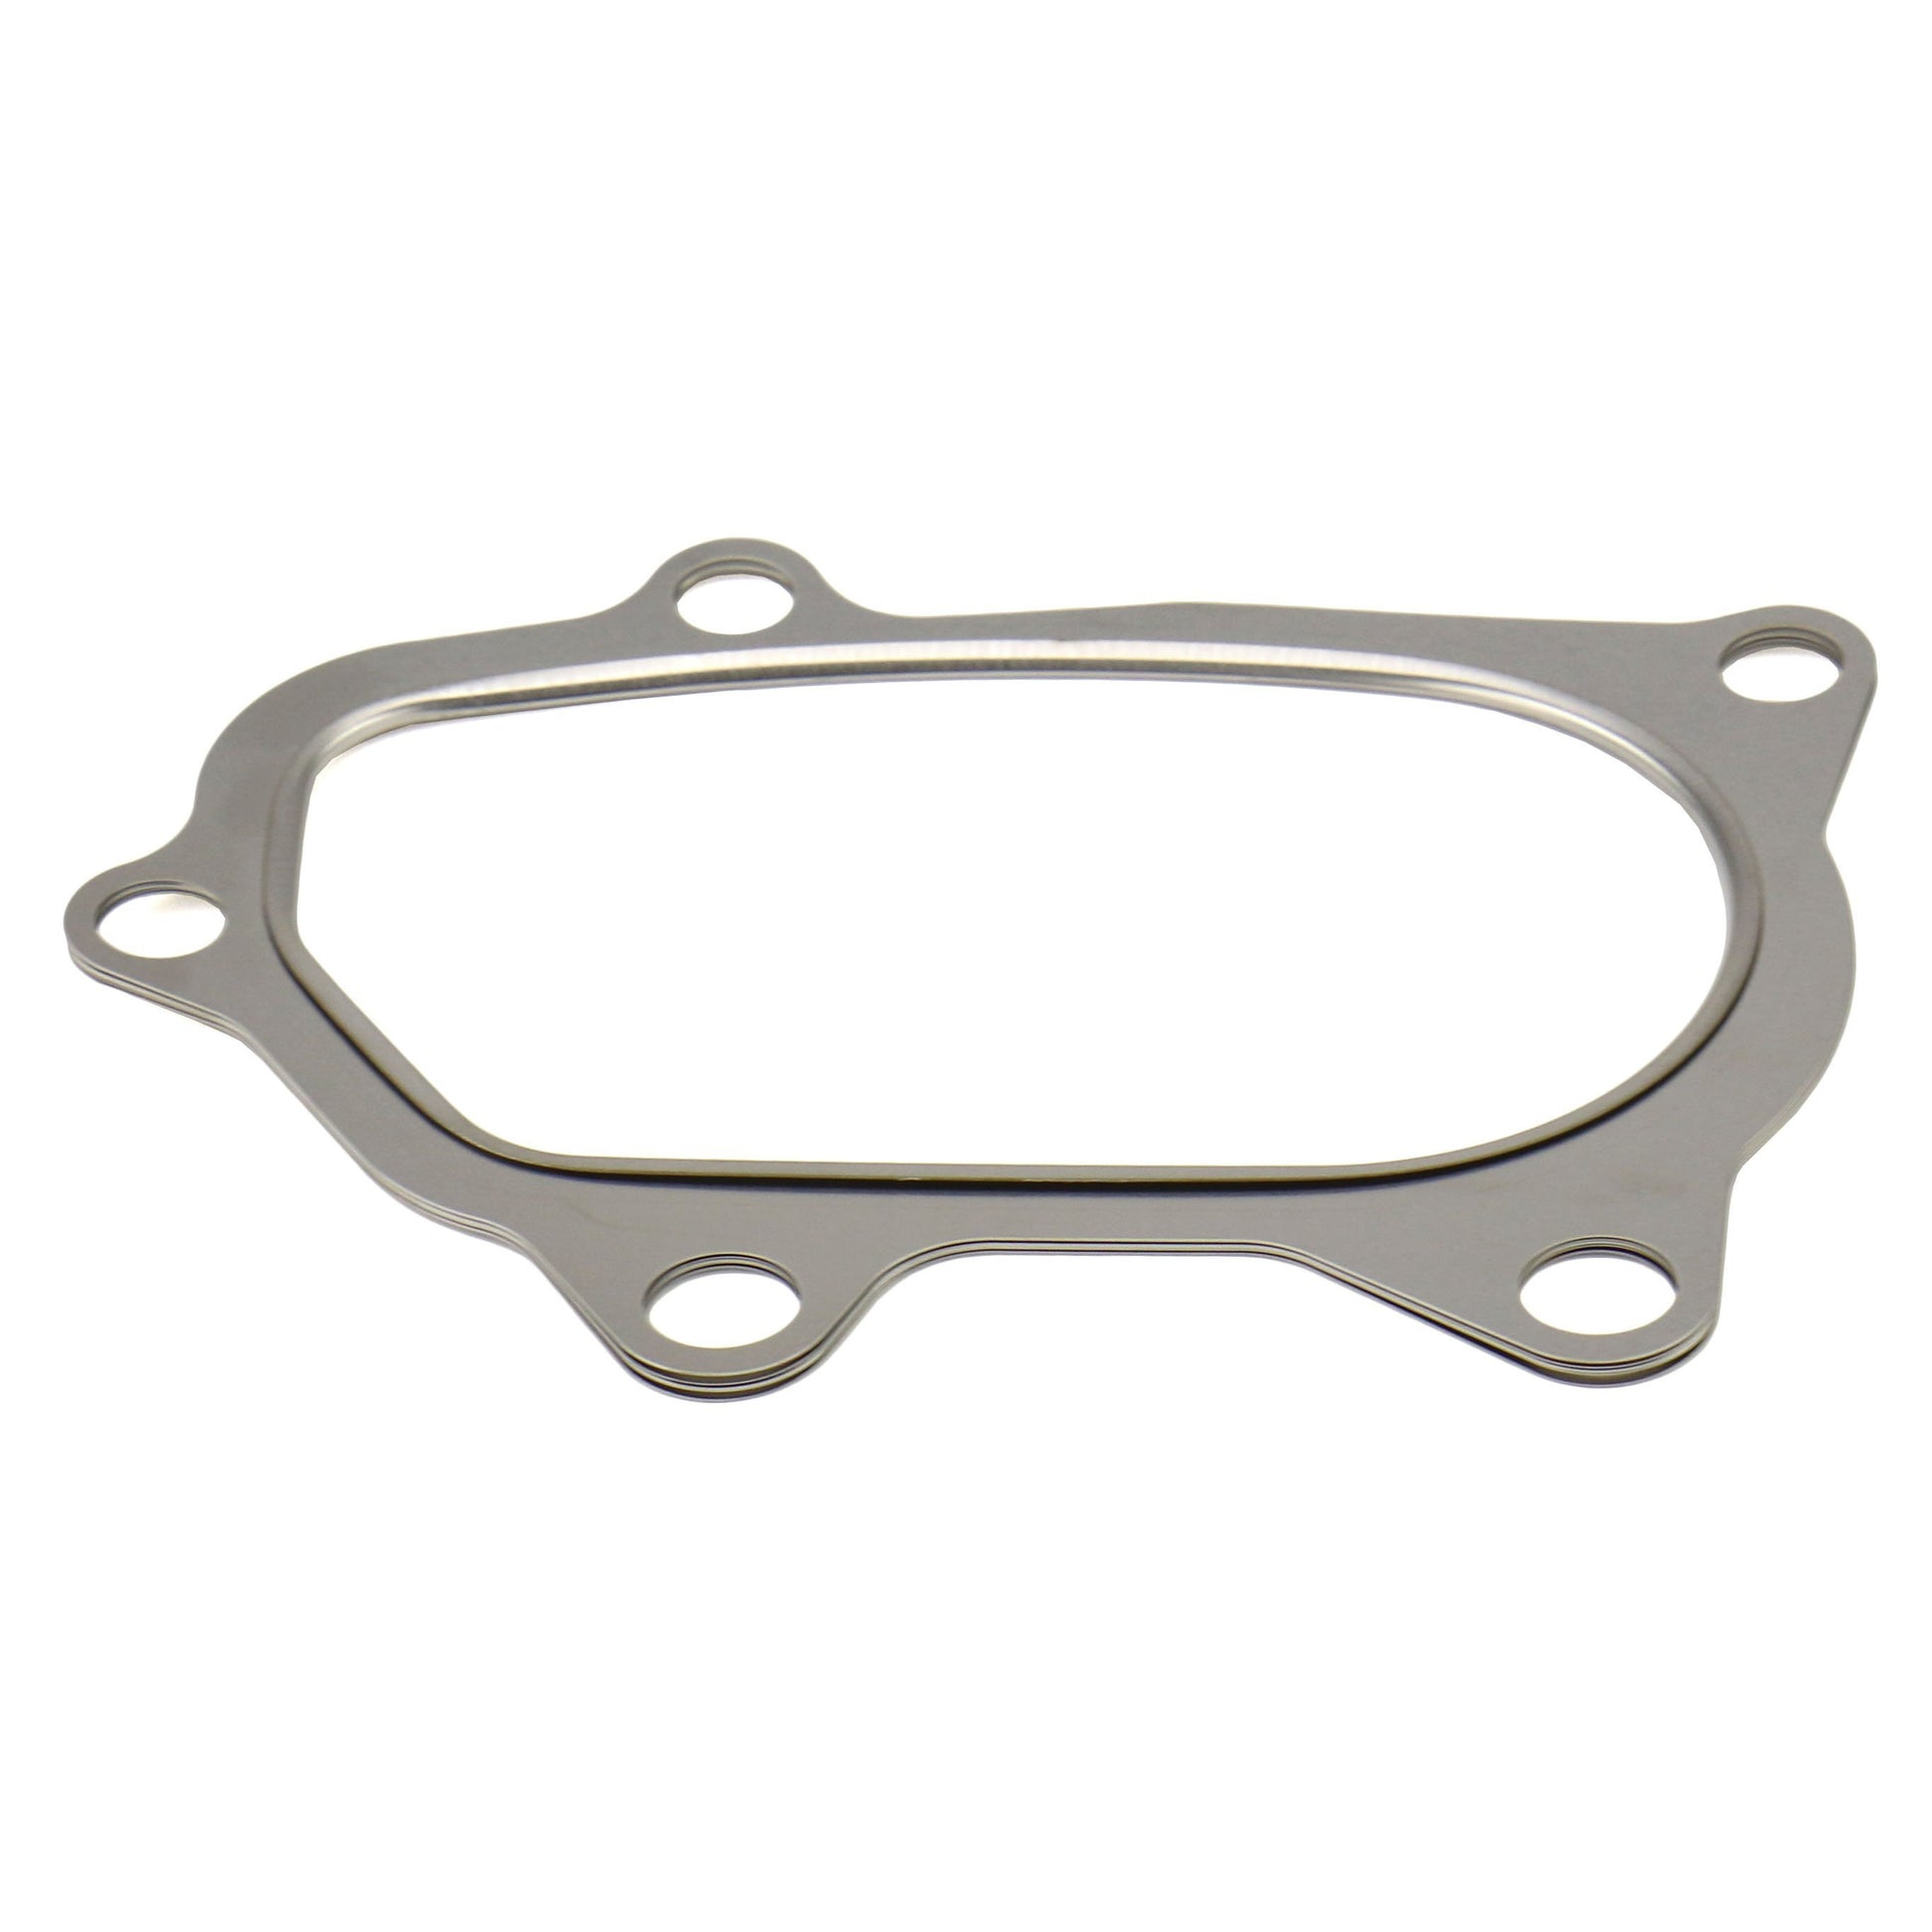 Faction Fab MLS Subaru EJ Turbo to Downpipe Gasket (1.10014.1)-FFA1.10014.1-1.10014.1-Exhaust Gaskets and Hardware-FactionFab-JDMuscle